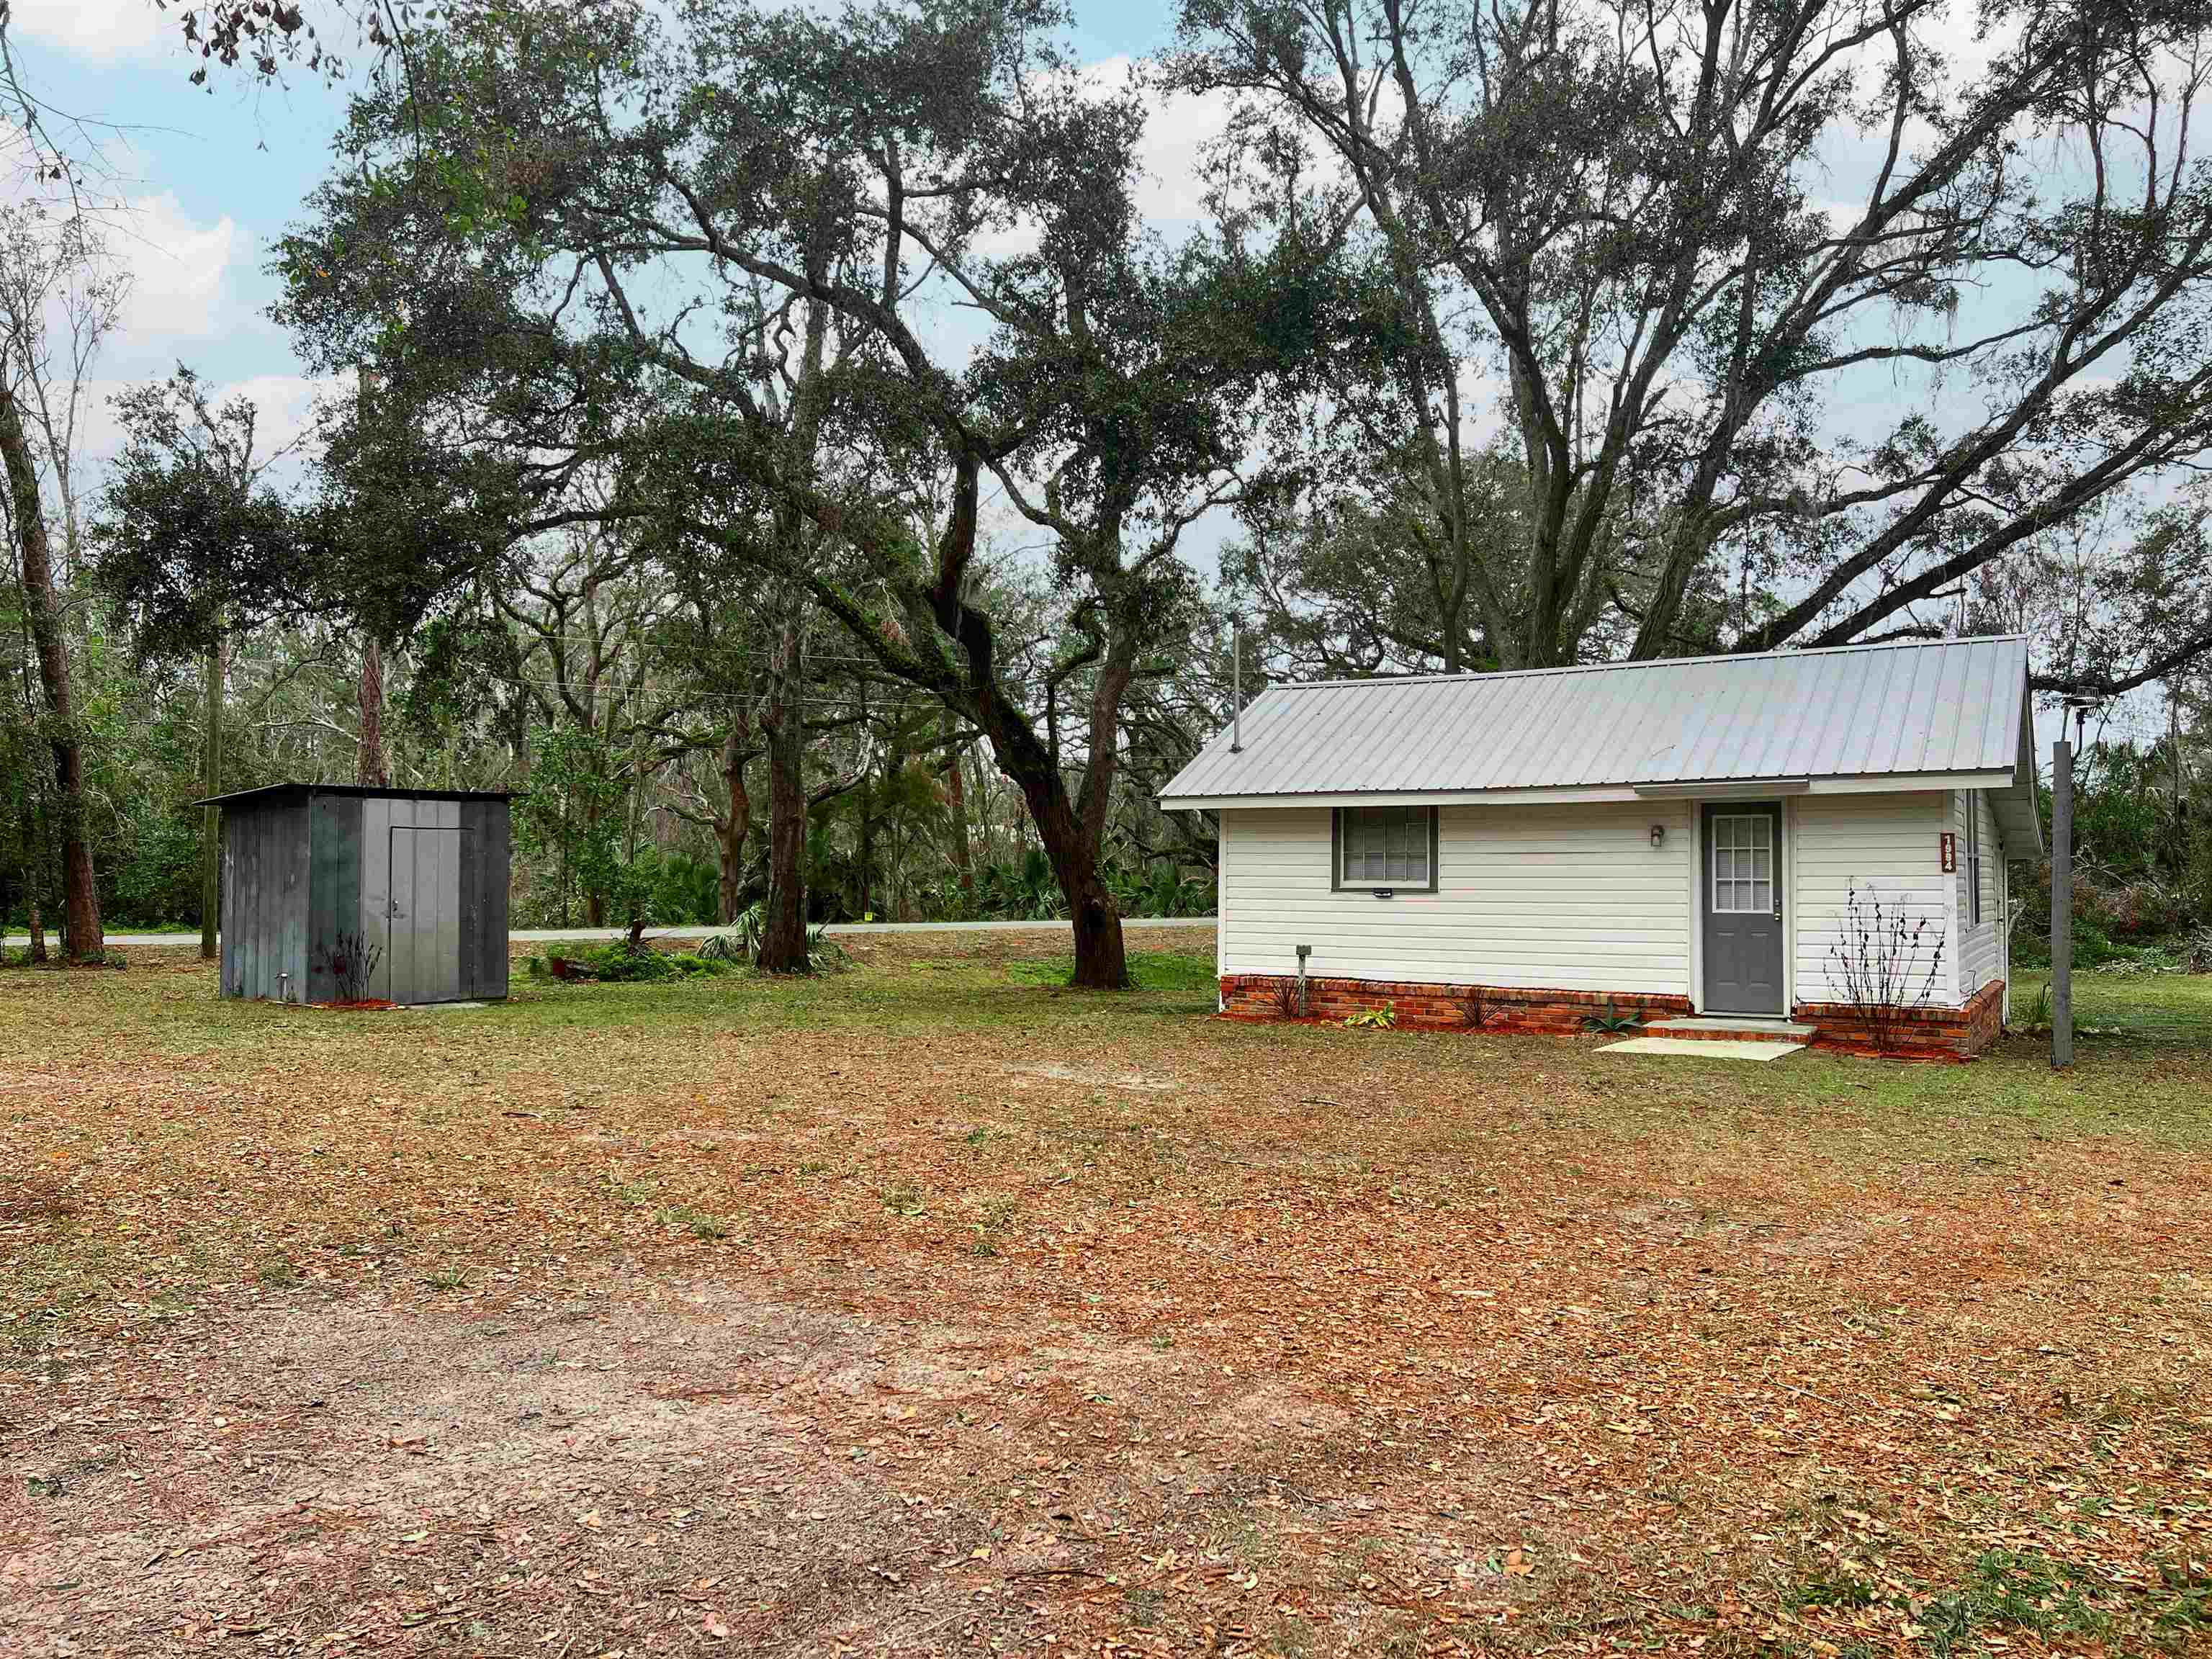 1994 Taylor Drive,PERRY,Florida 32347,2 Bedrooms Bedrooms,1 BathroomBathrooms,Detached single family,1994 Taylor Drive,367166